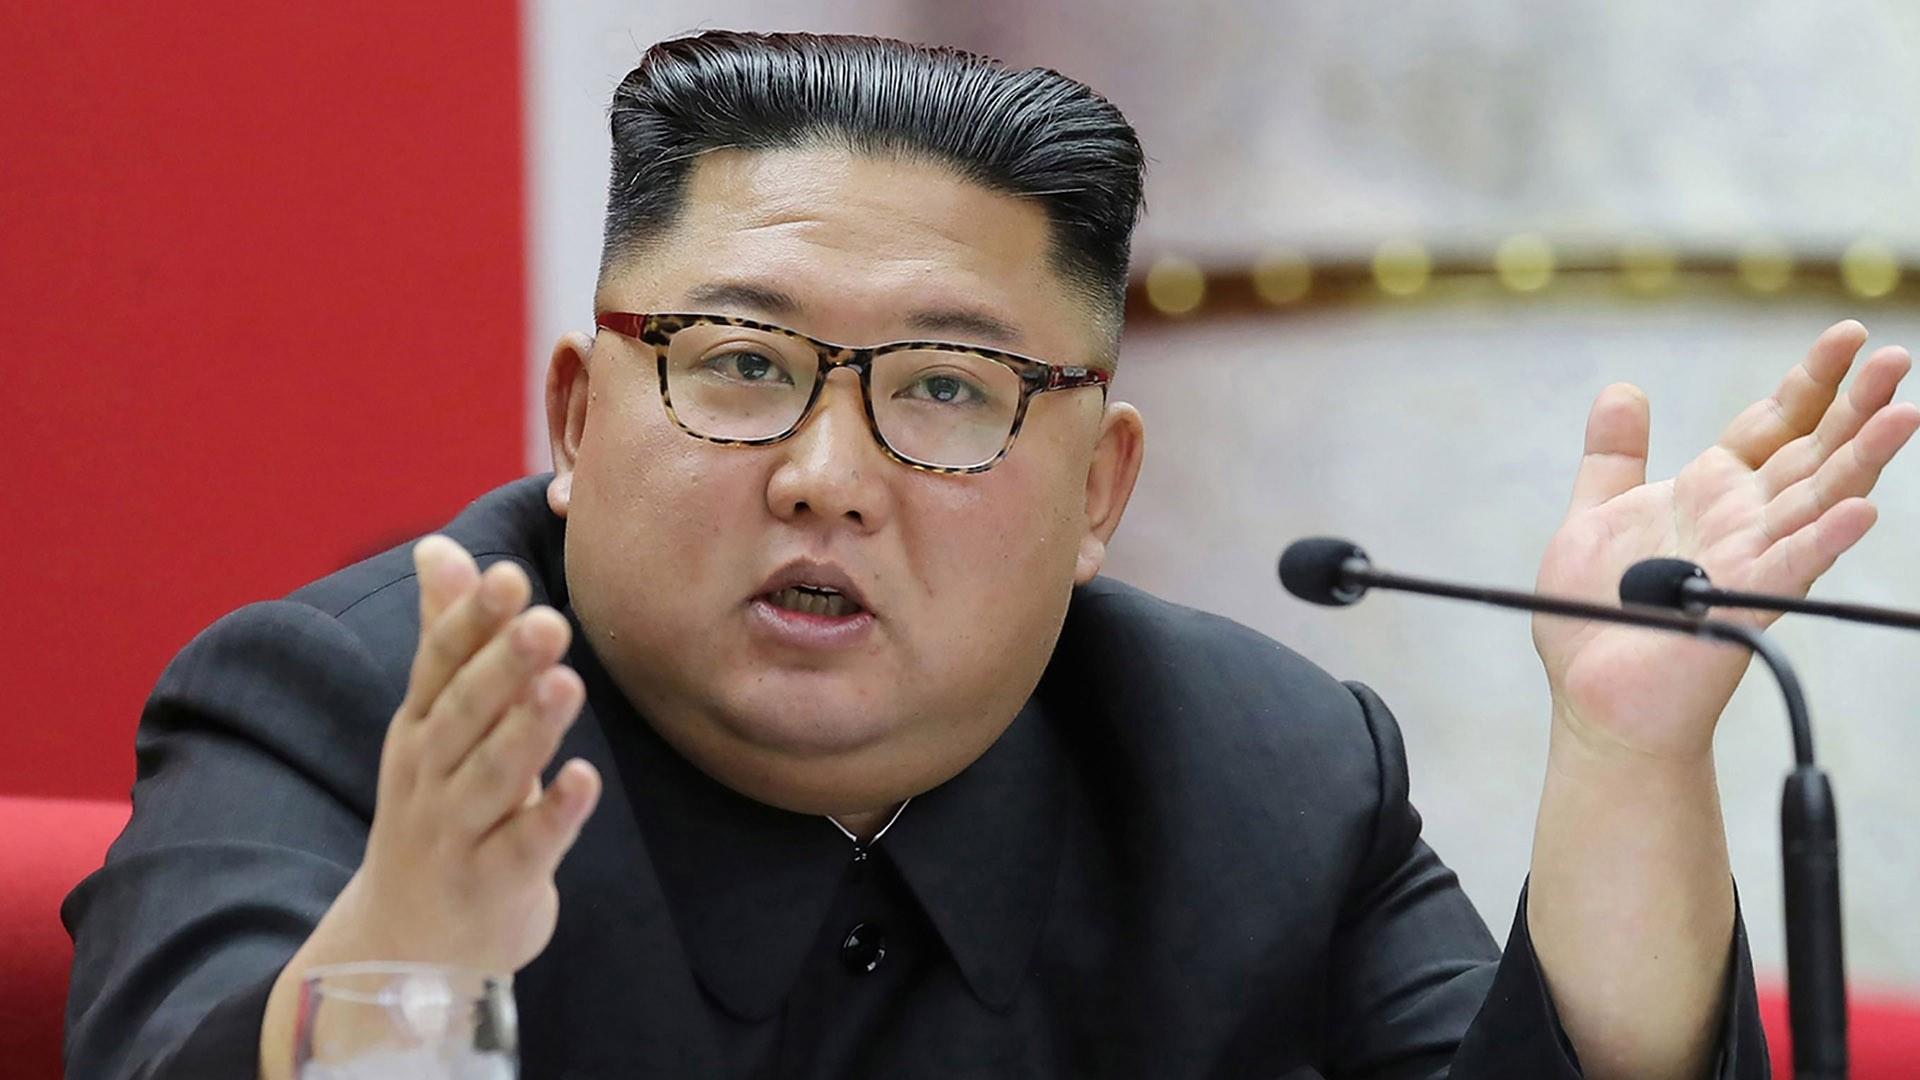 Kim Jong-Un to get star makeover. - The Rochdale Herald